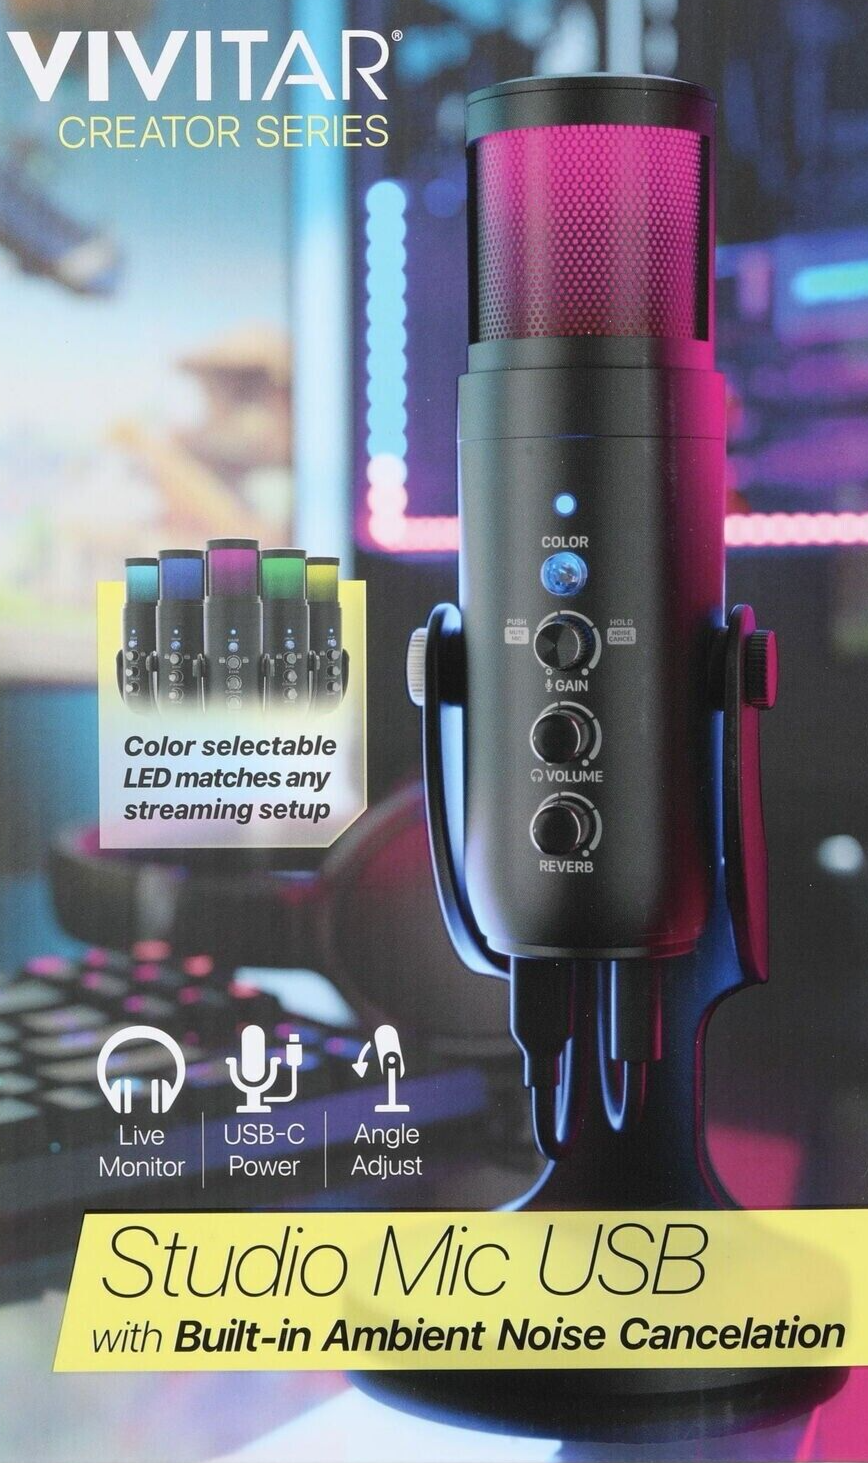 LED USB Audio Recording Microphone - Studio - Home - Color - Adjustable - Vivitar - new - professional - cheap - high quality - beginner - new - used - sale - discount 